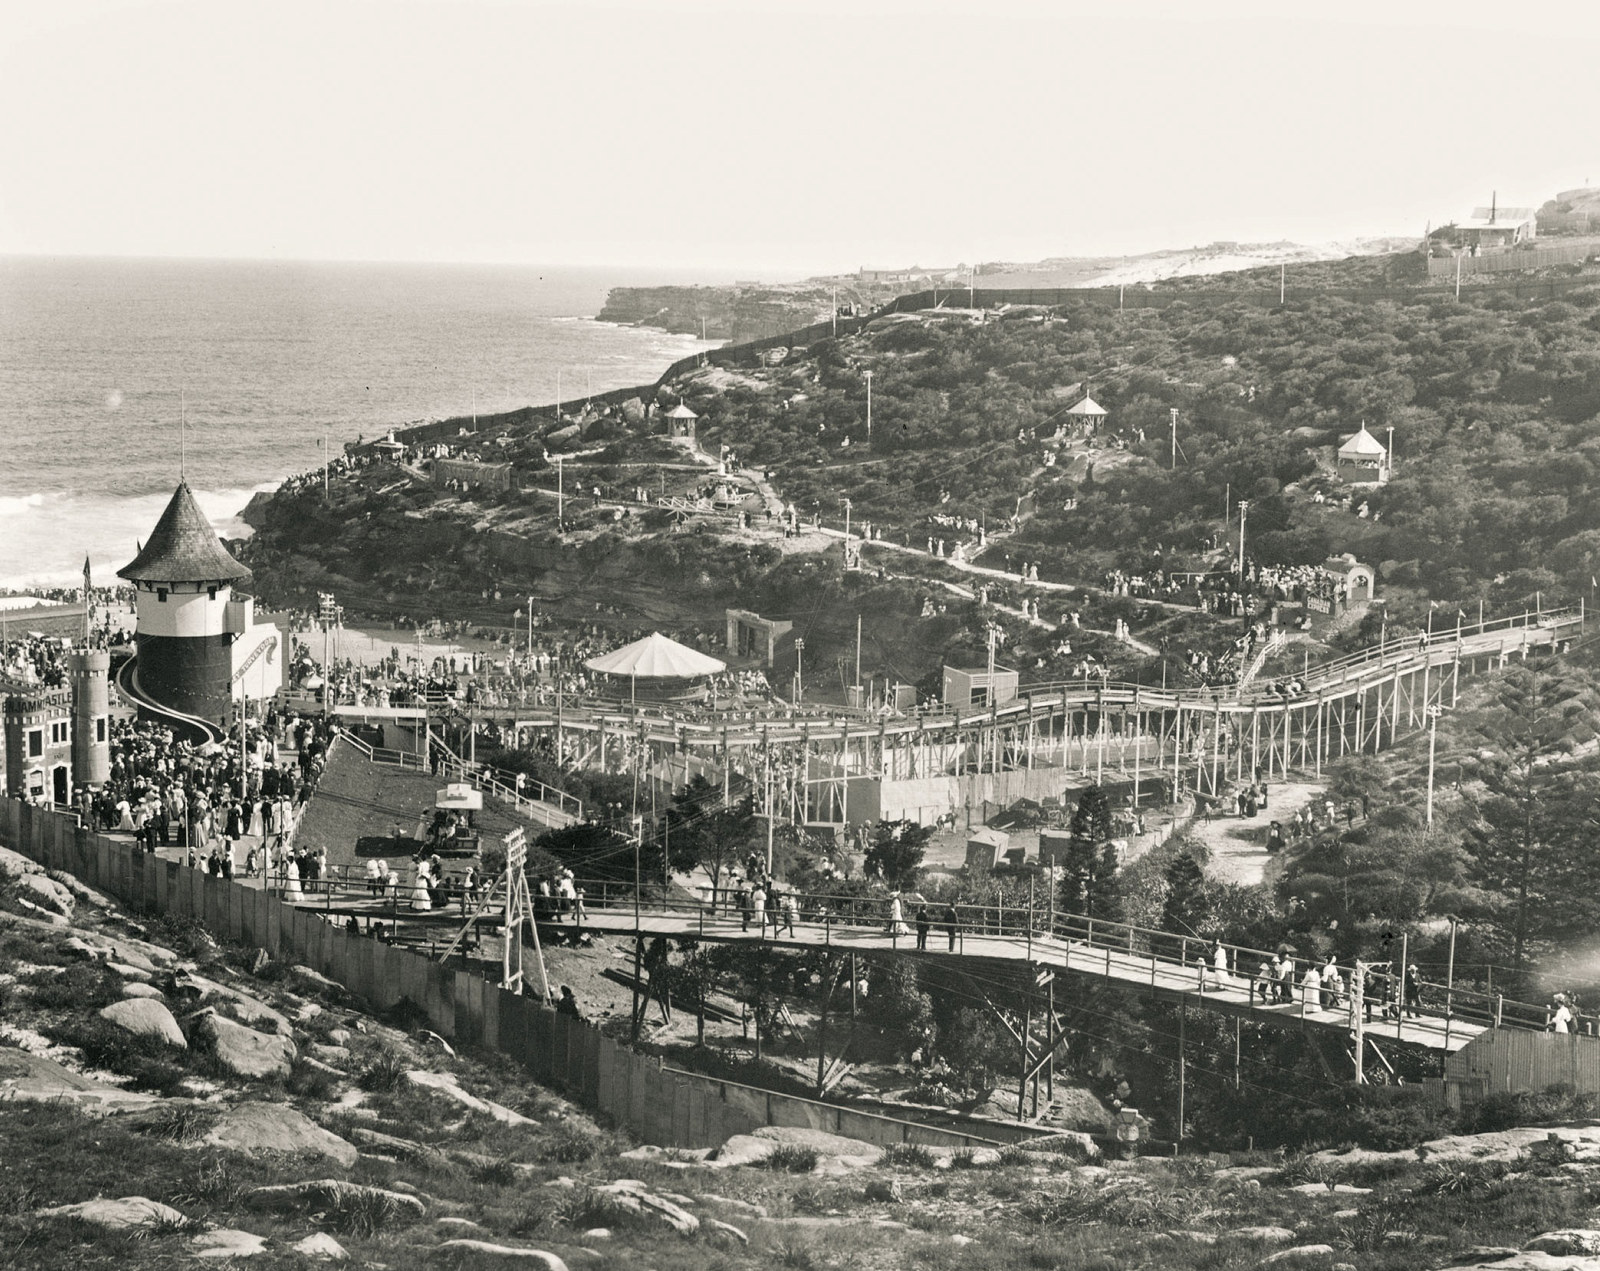 View of the roughed headlands and steep hills leading to Tamarama Beach crowded with people and light with timber walkways and amusement park structures.